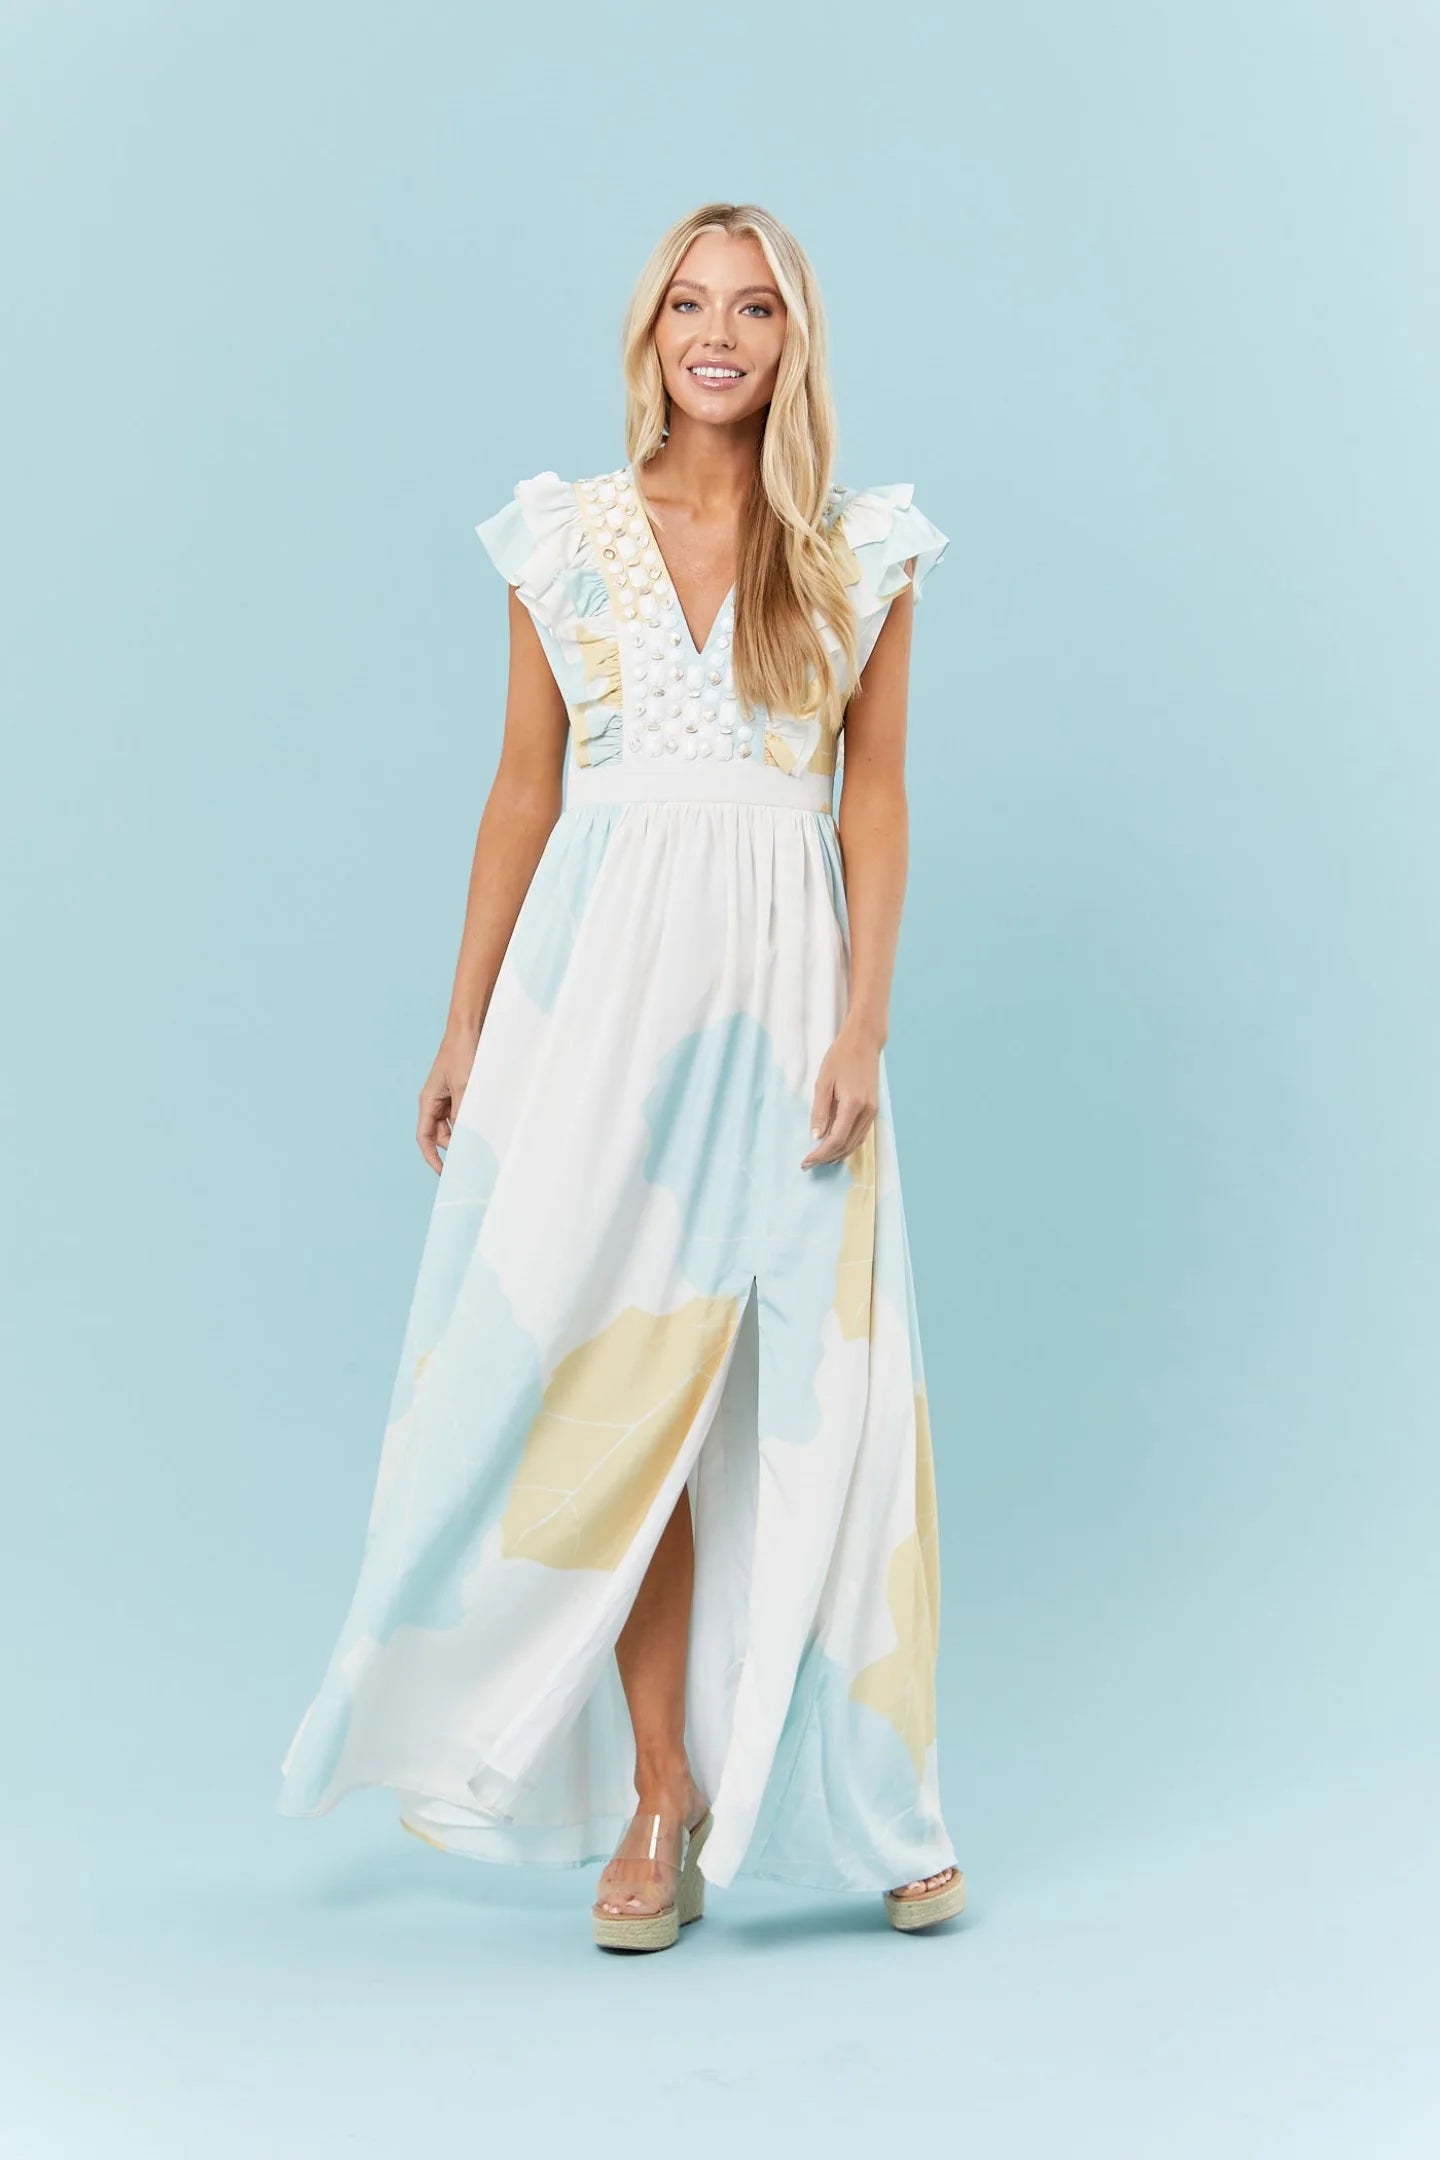 sheridan french stacey dress in blue palms